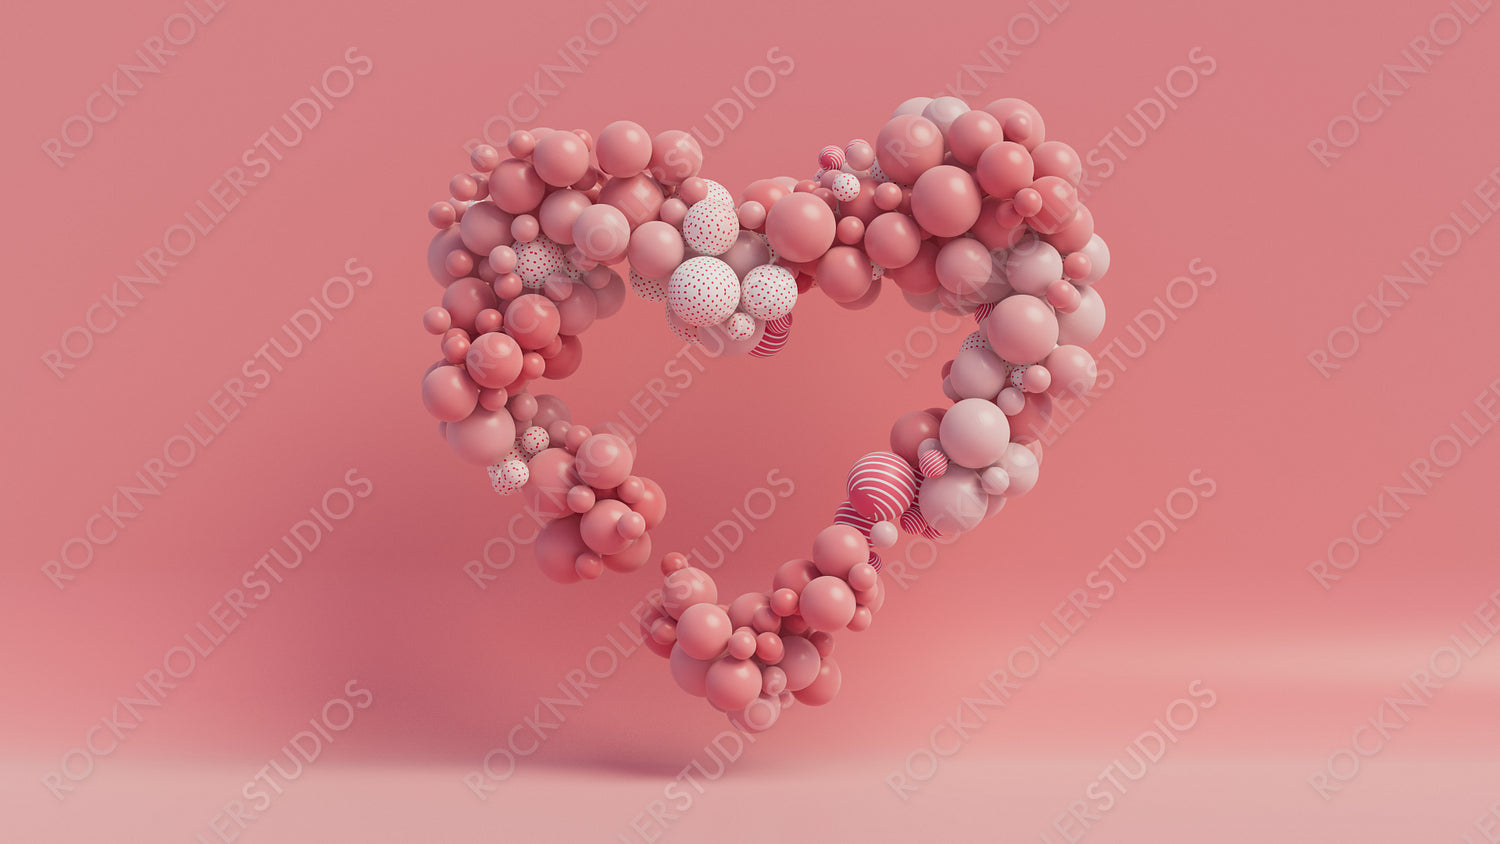 Multicolored  Balloon Love Heart. Pink, Polka Dot and Striped Balloons arranged in a heart shape. 3D Render 